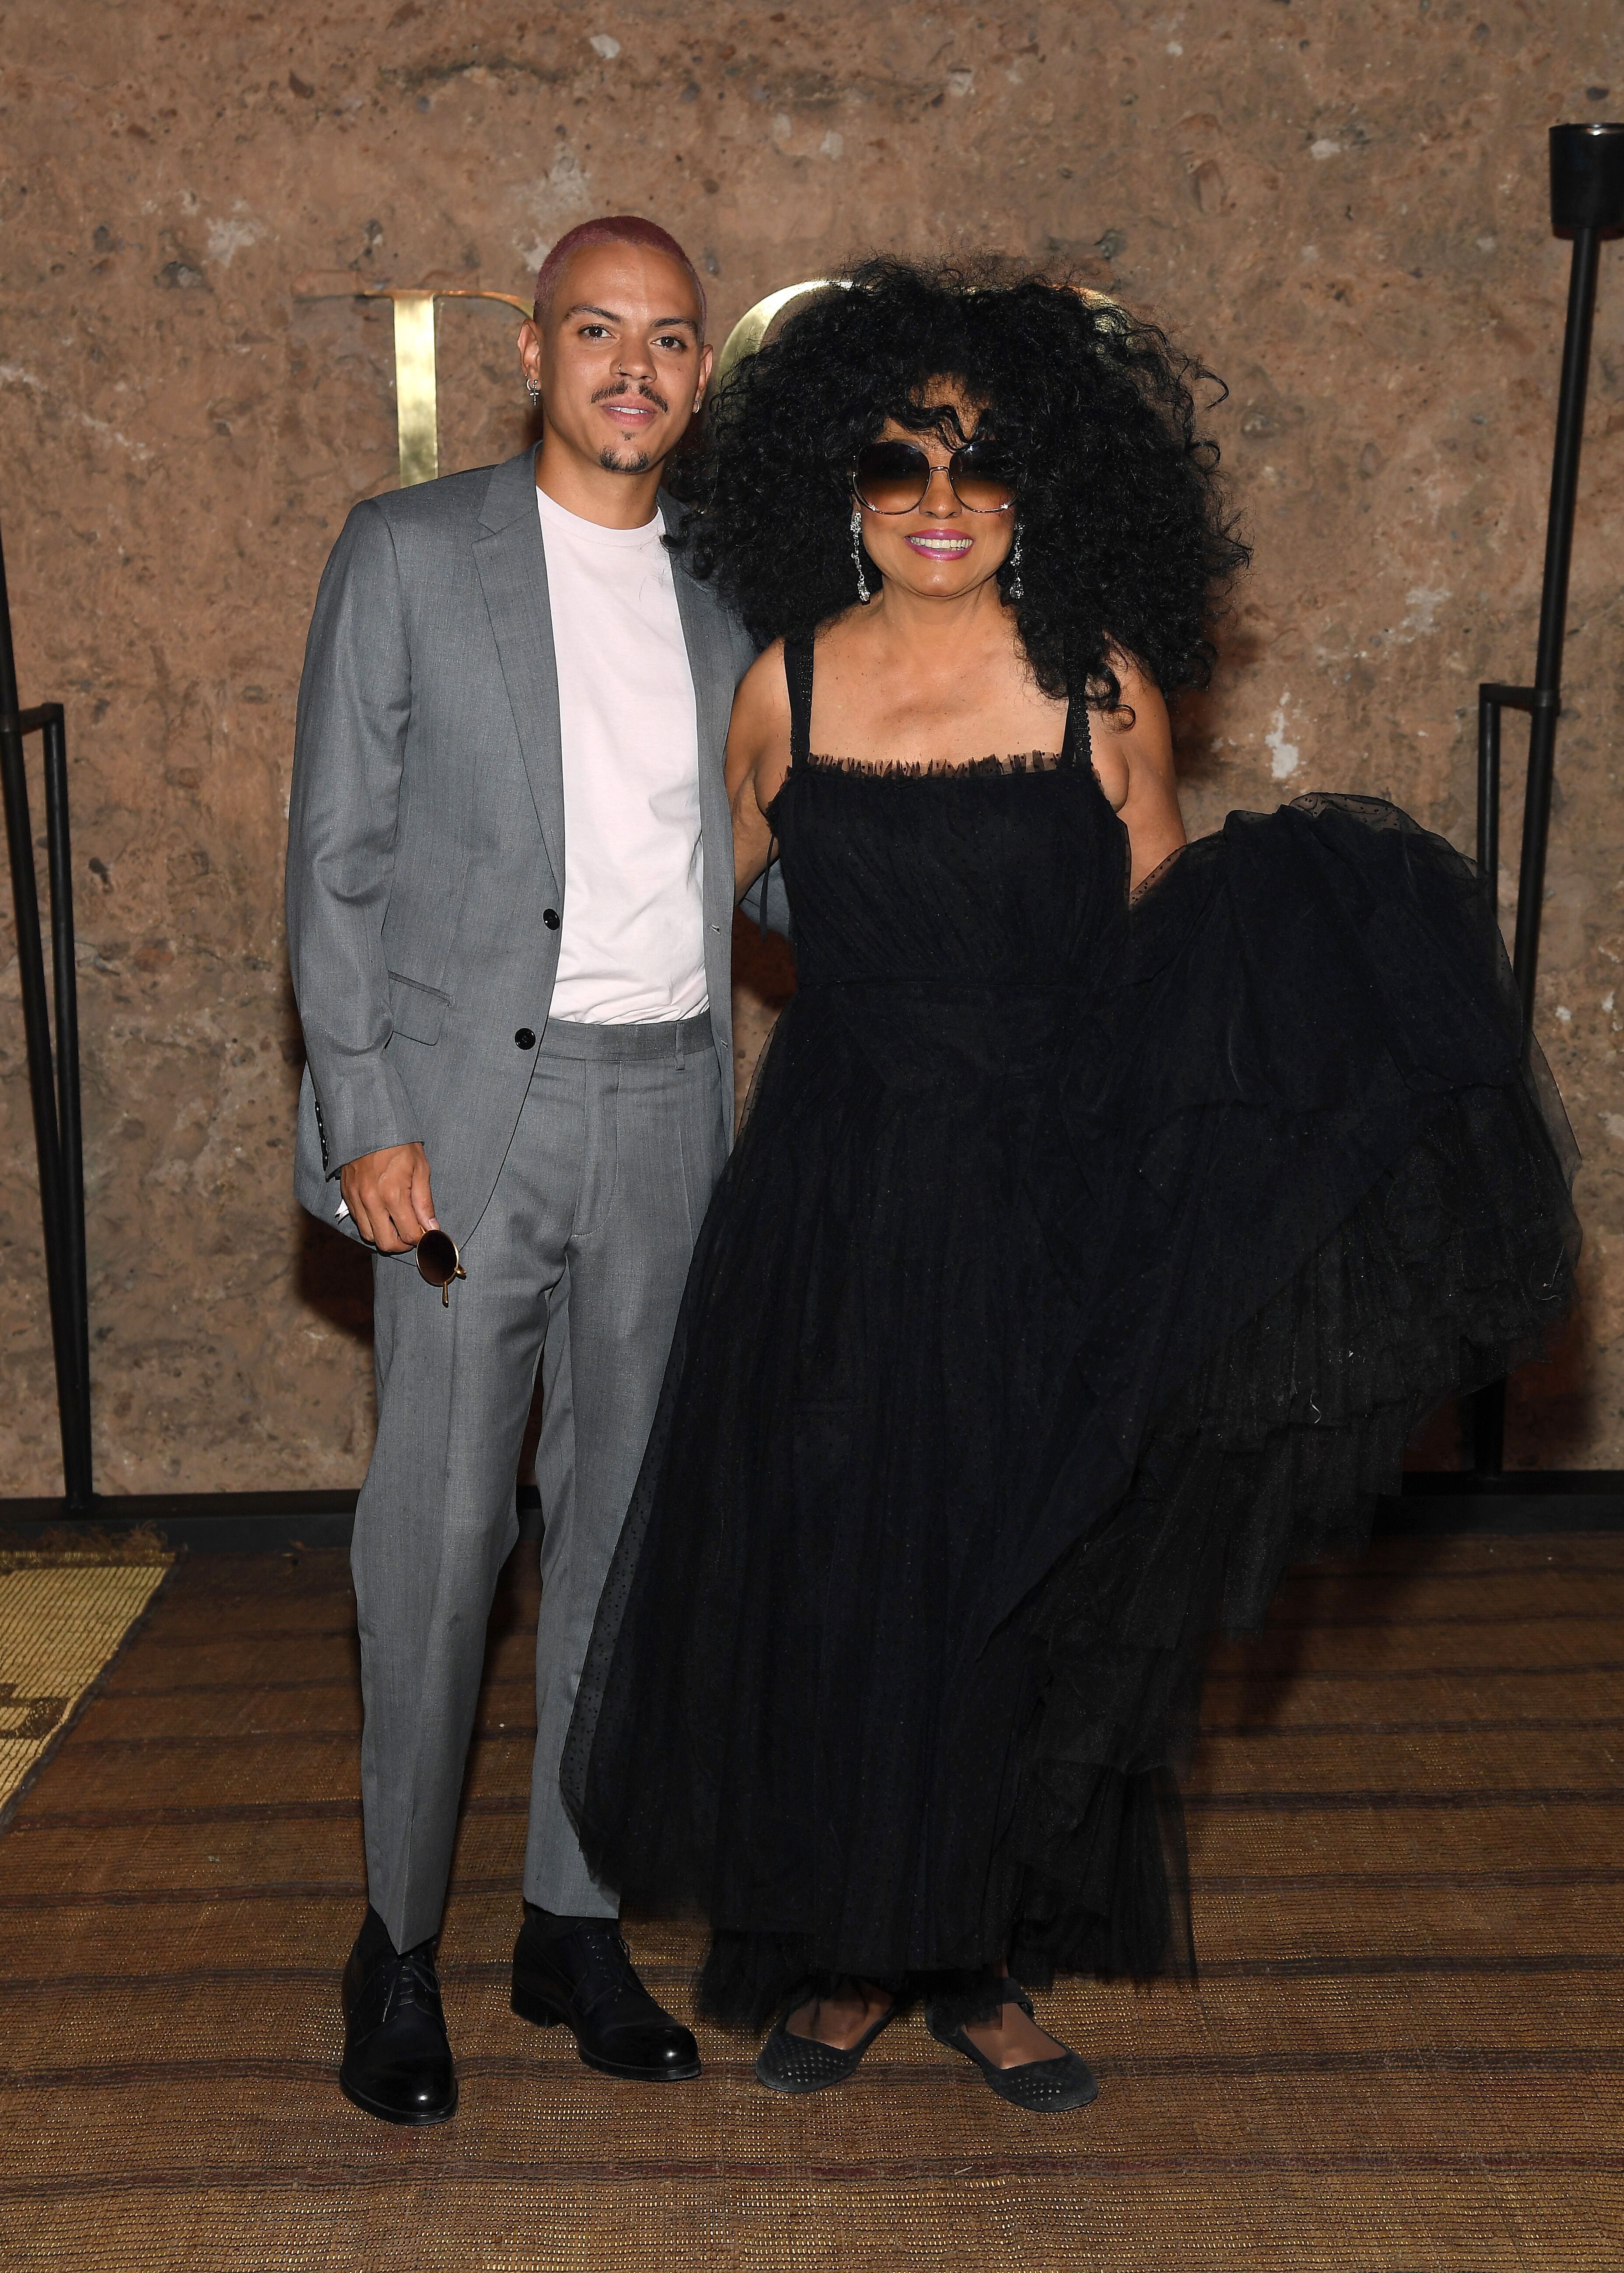 Evan Ross and Diana Ross at the Christian Dior Couture S/S20 Cruise Collection on April 29, 2019 in Marrakech, Morocco. | Photo: Getty Images